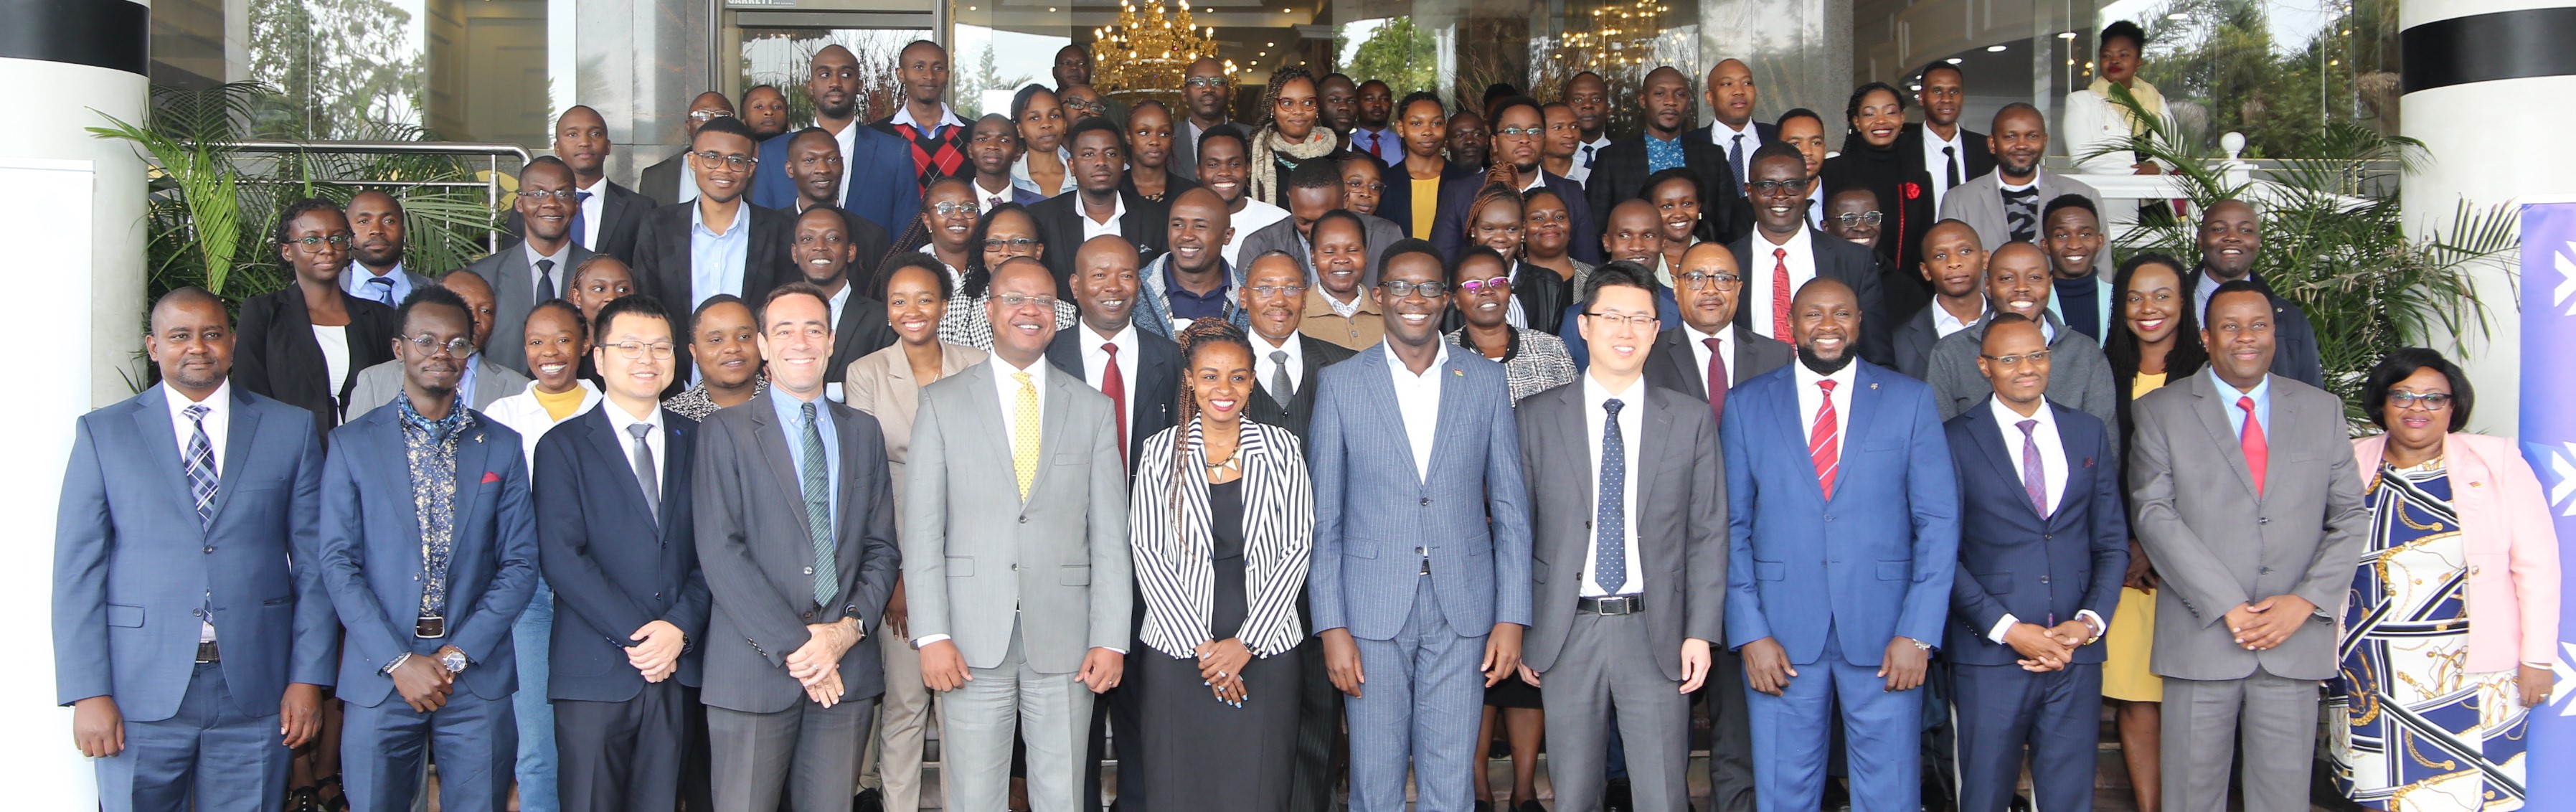 CA Director General Mr. Ezra Chiloba (centre) with participants after launching the hackathon and bootcamp series ahead of the October Cyber Security Awareness Month.